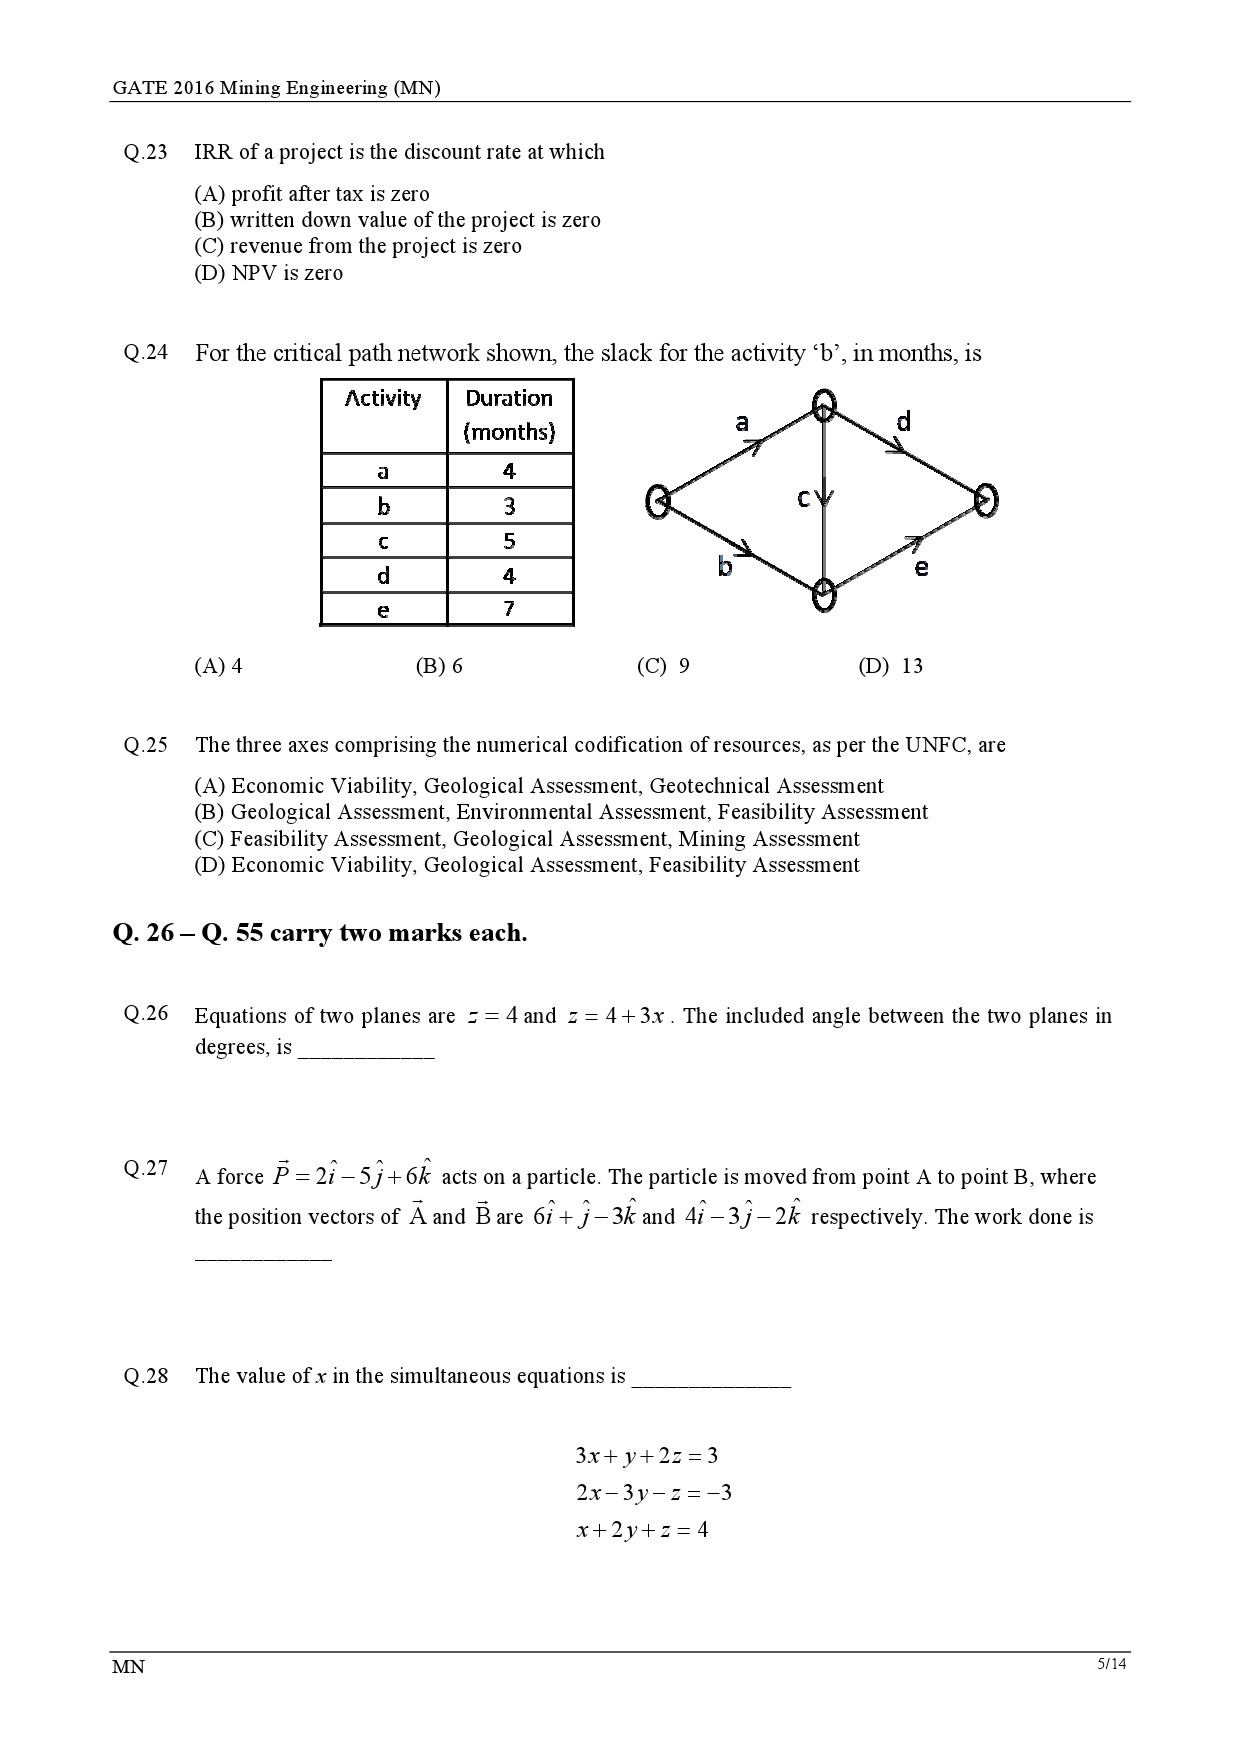 GATE Exam Question Paper 2016 Mining Engineering 8